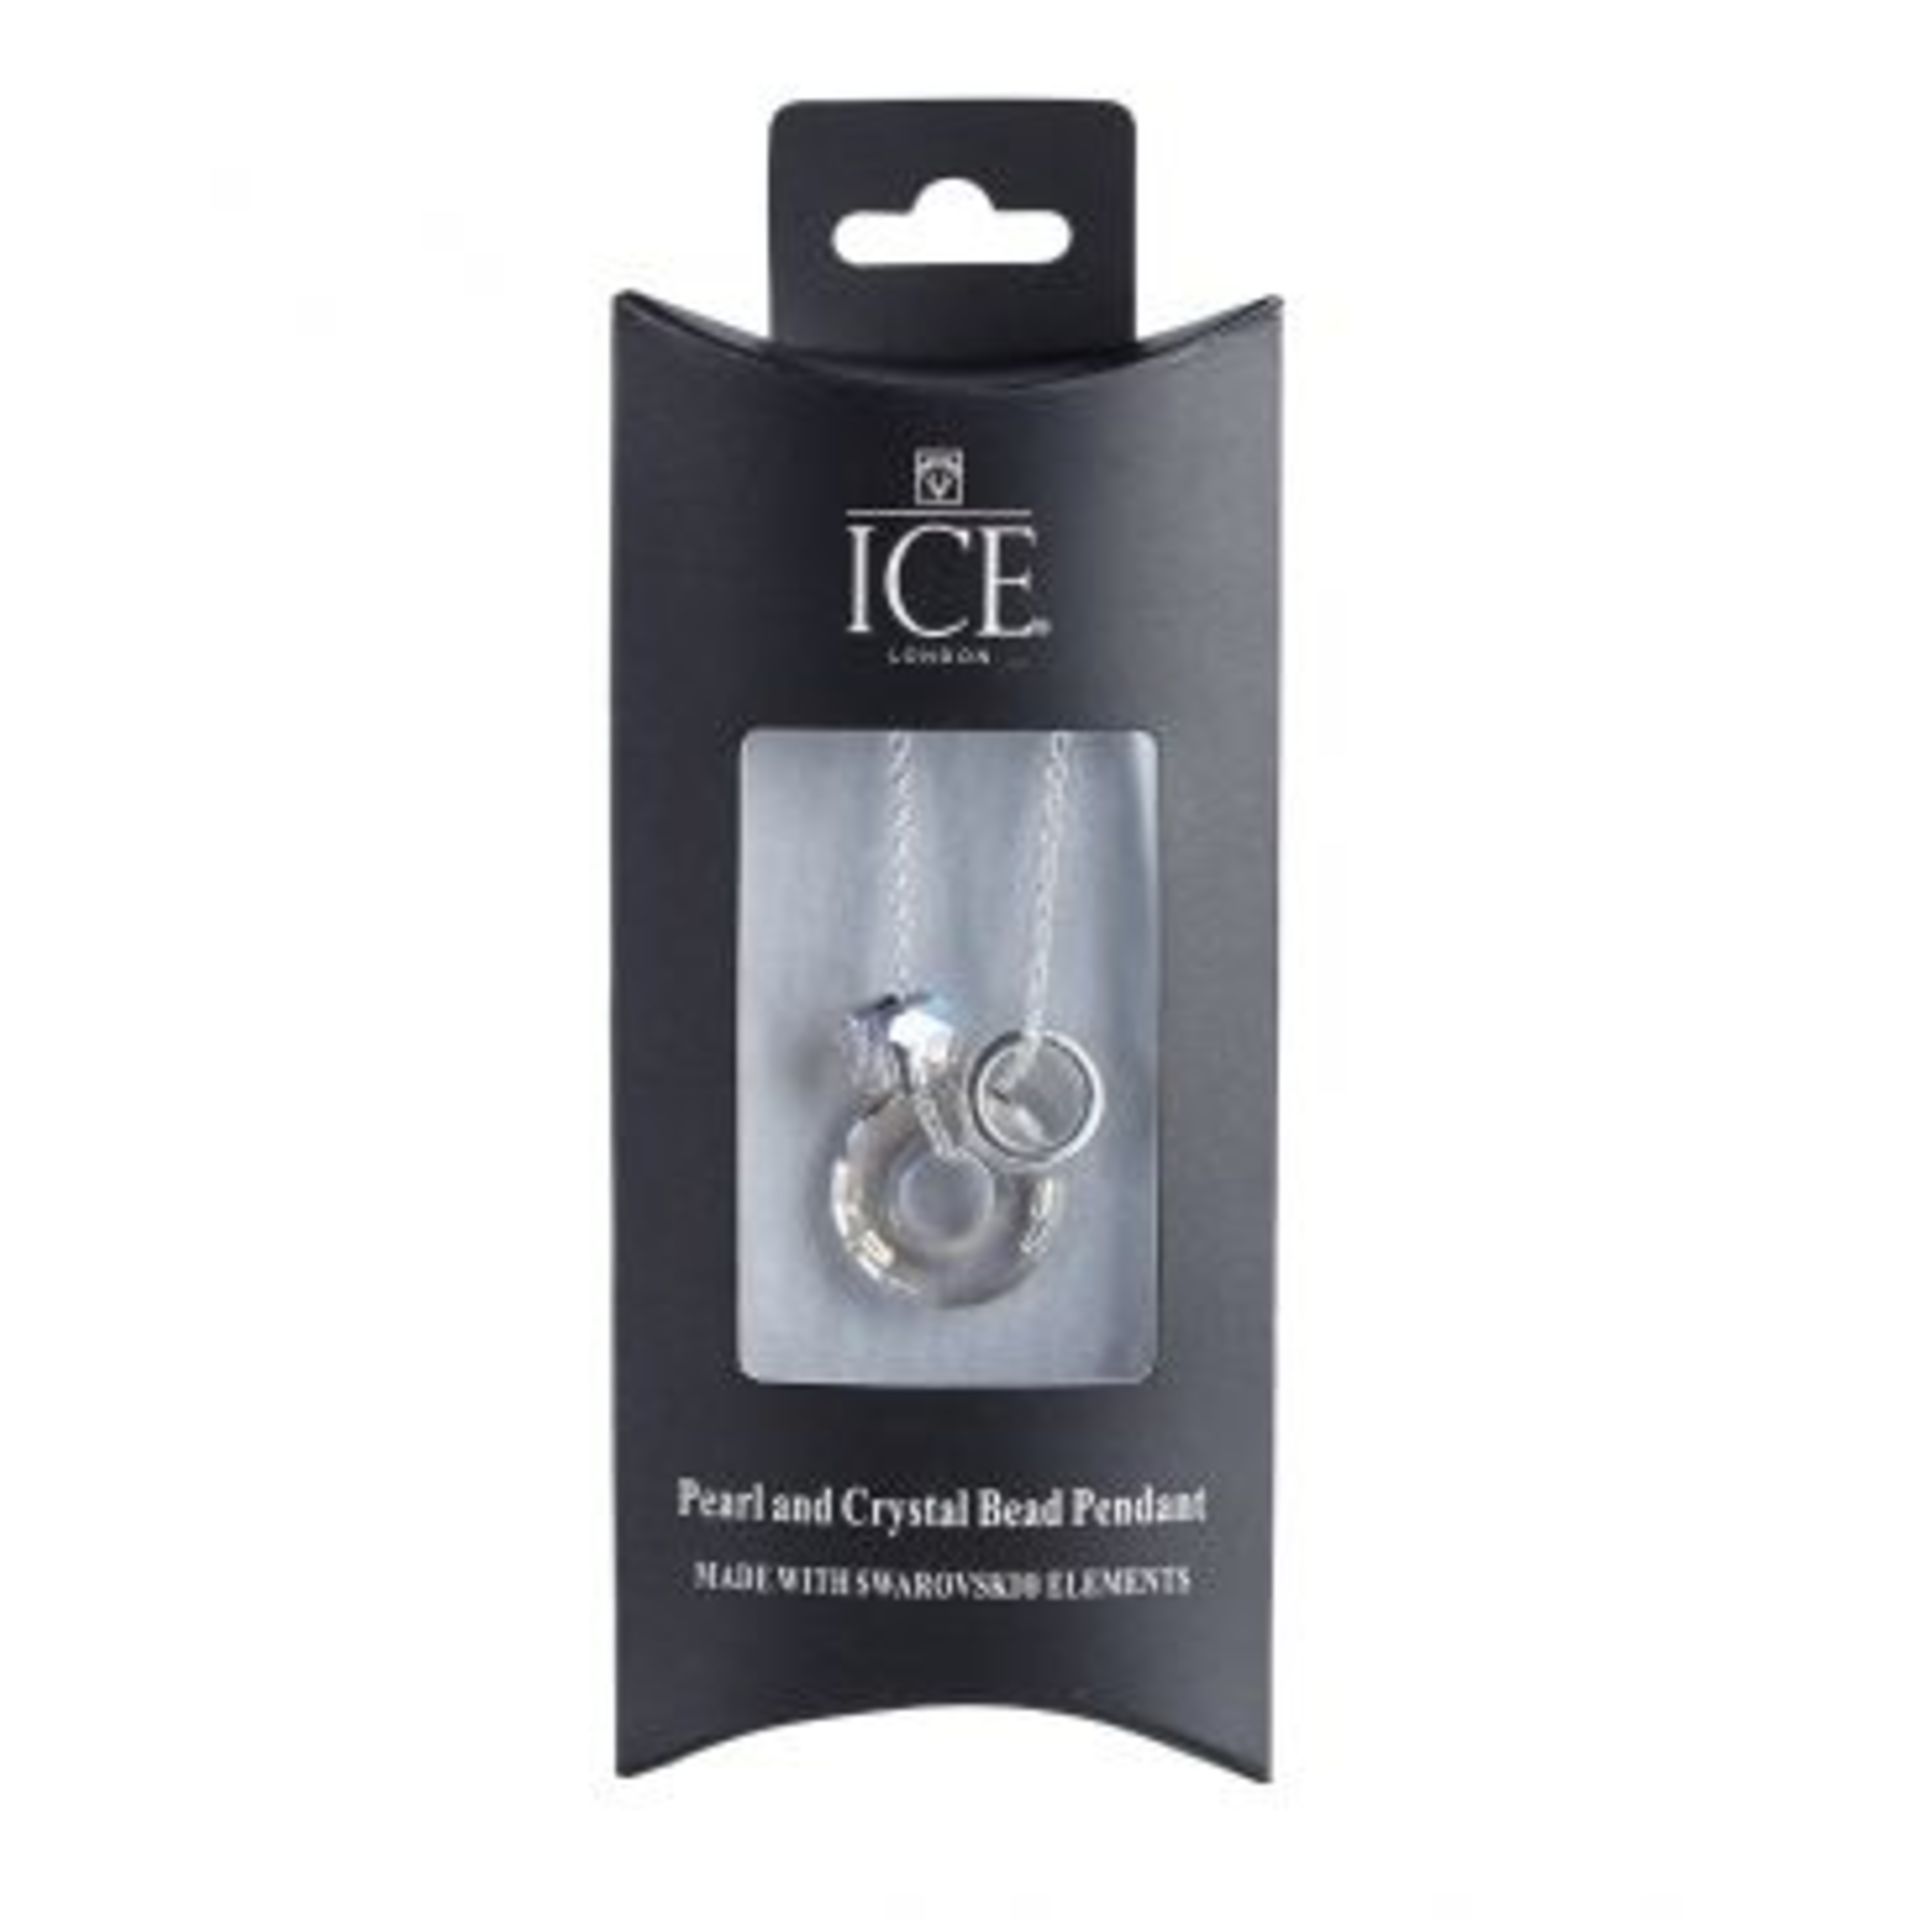 10 x PEARL AND CHARM NECKLACES By ICE London - EGJ-9902 - Features 3 Beautiful Charms Made from - Image 3 of 3